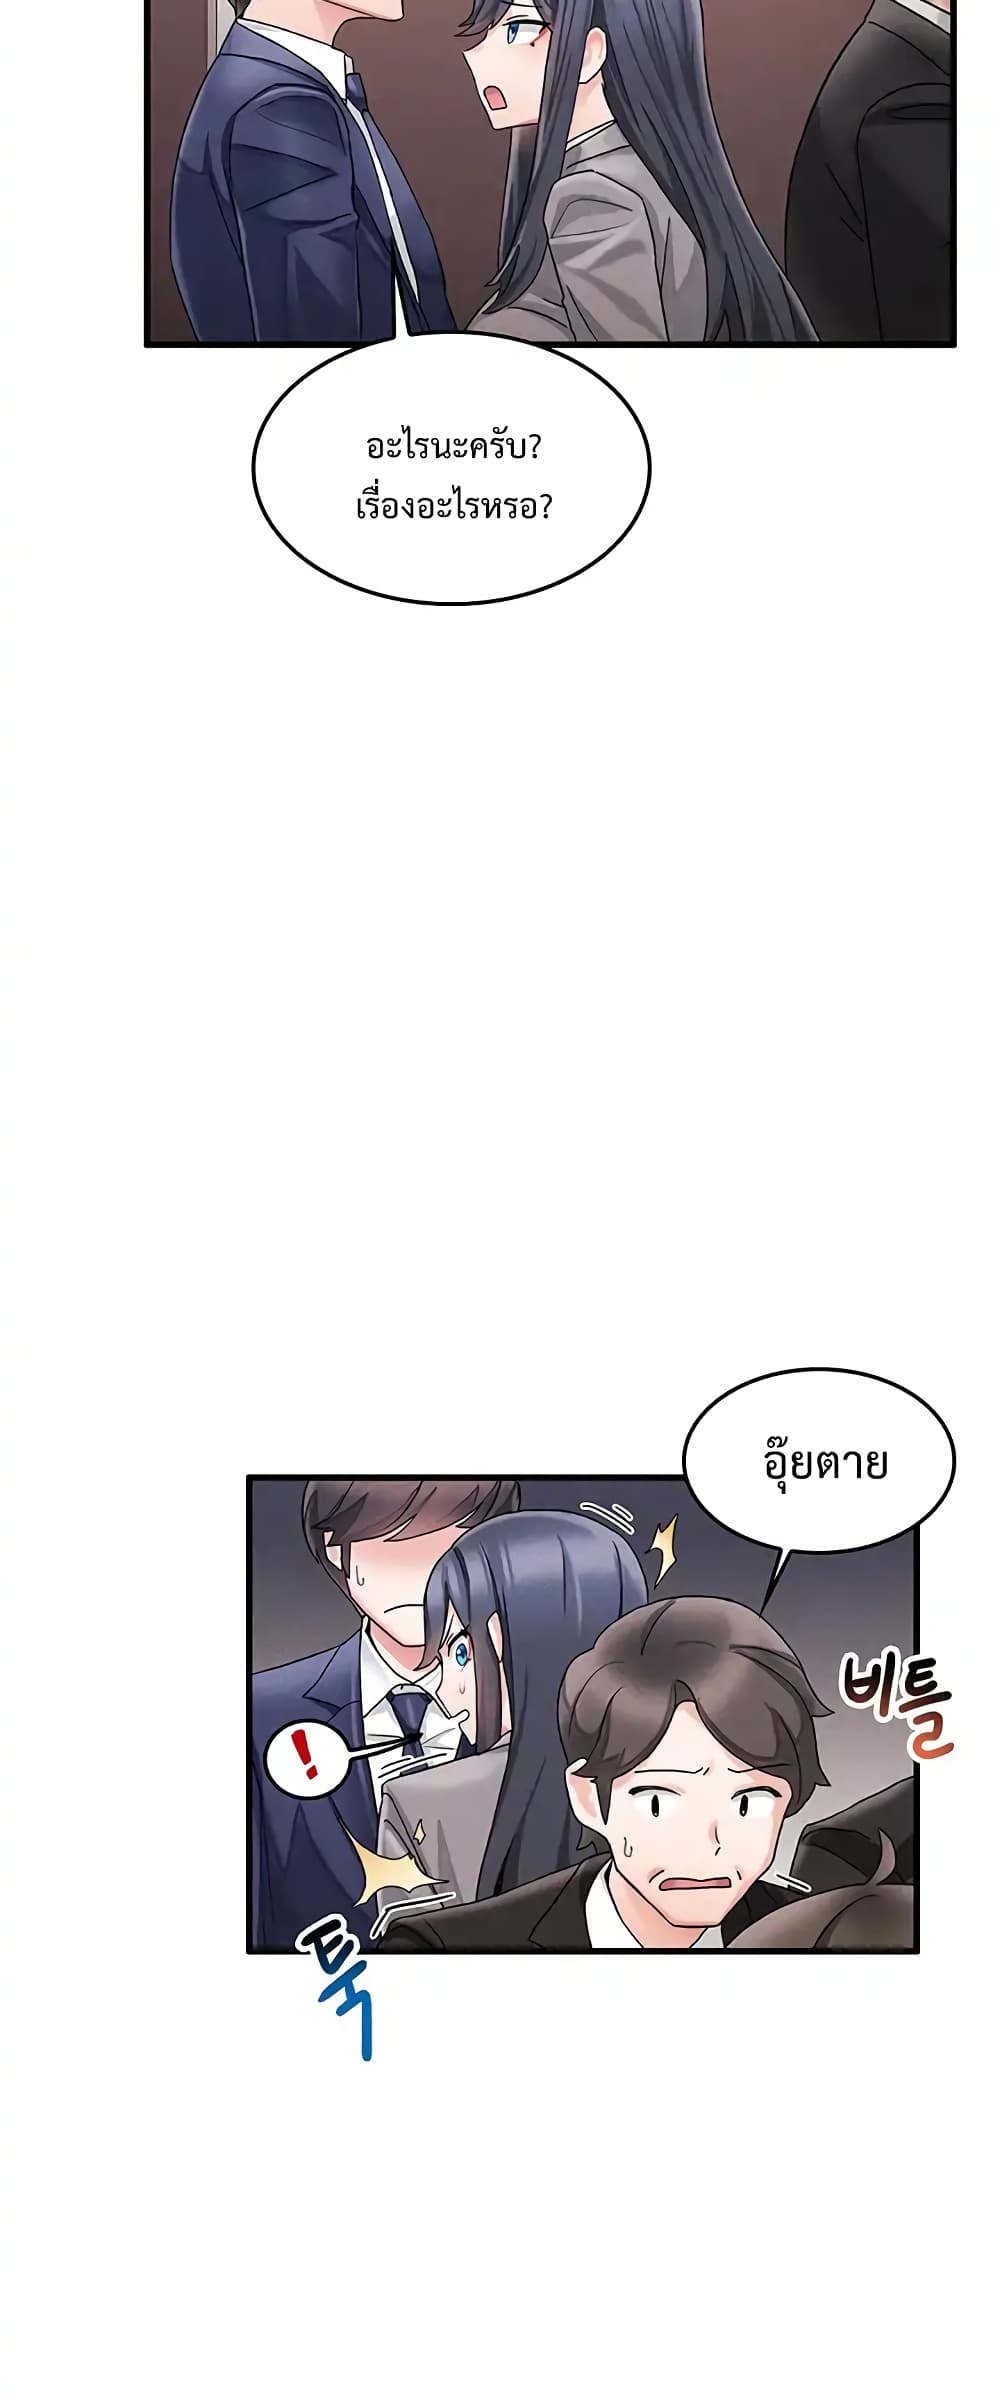 Relationship Reverse Button: Let’s Make Her Submissive 1 ภาพที่ 23